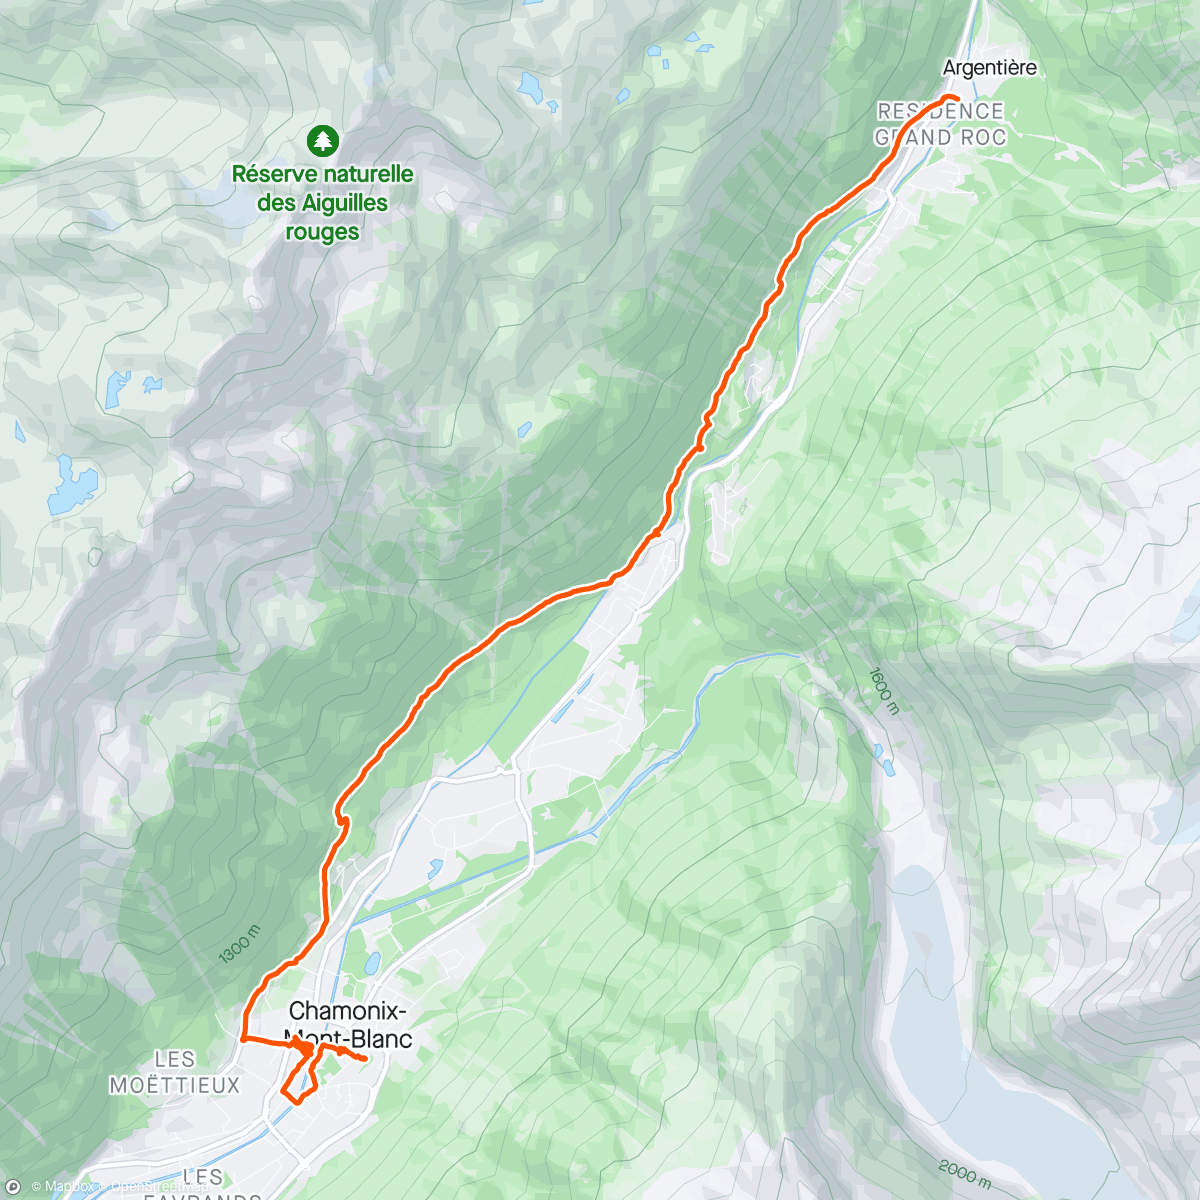 Mappa dell'attività Chamonix time! Kept it low and dry, hiking from Argentiere to Chamonix, train back to Buet on the Mont Blanc Express🚂🏔️